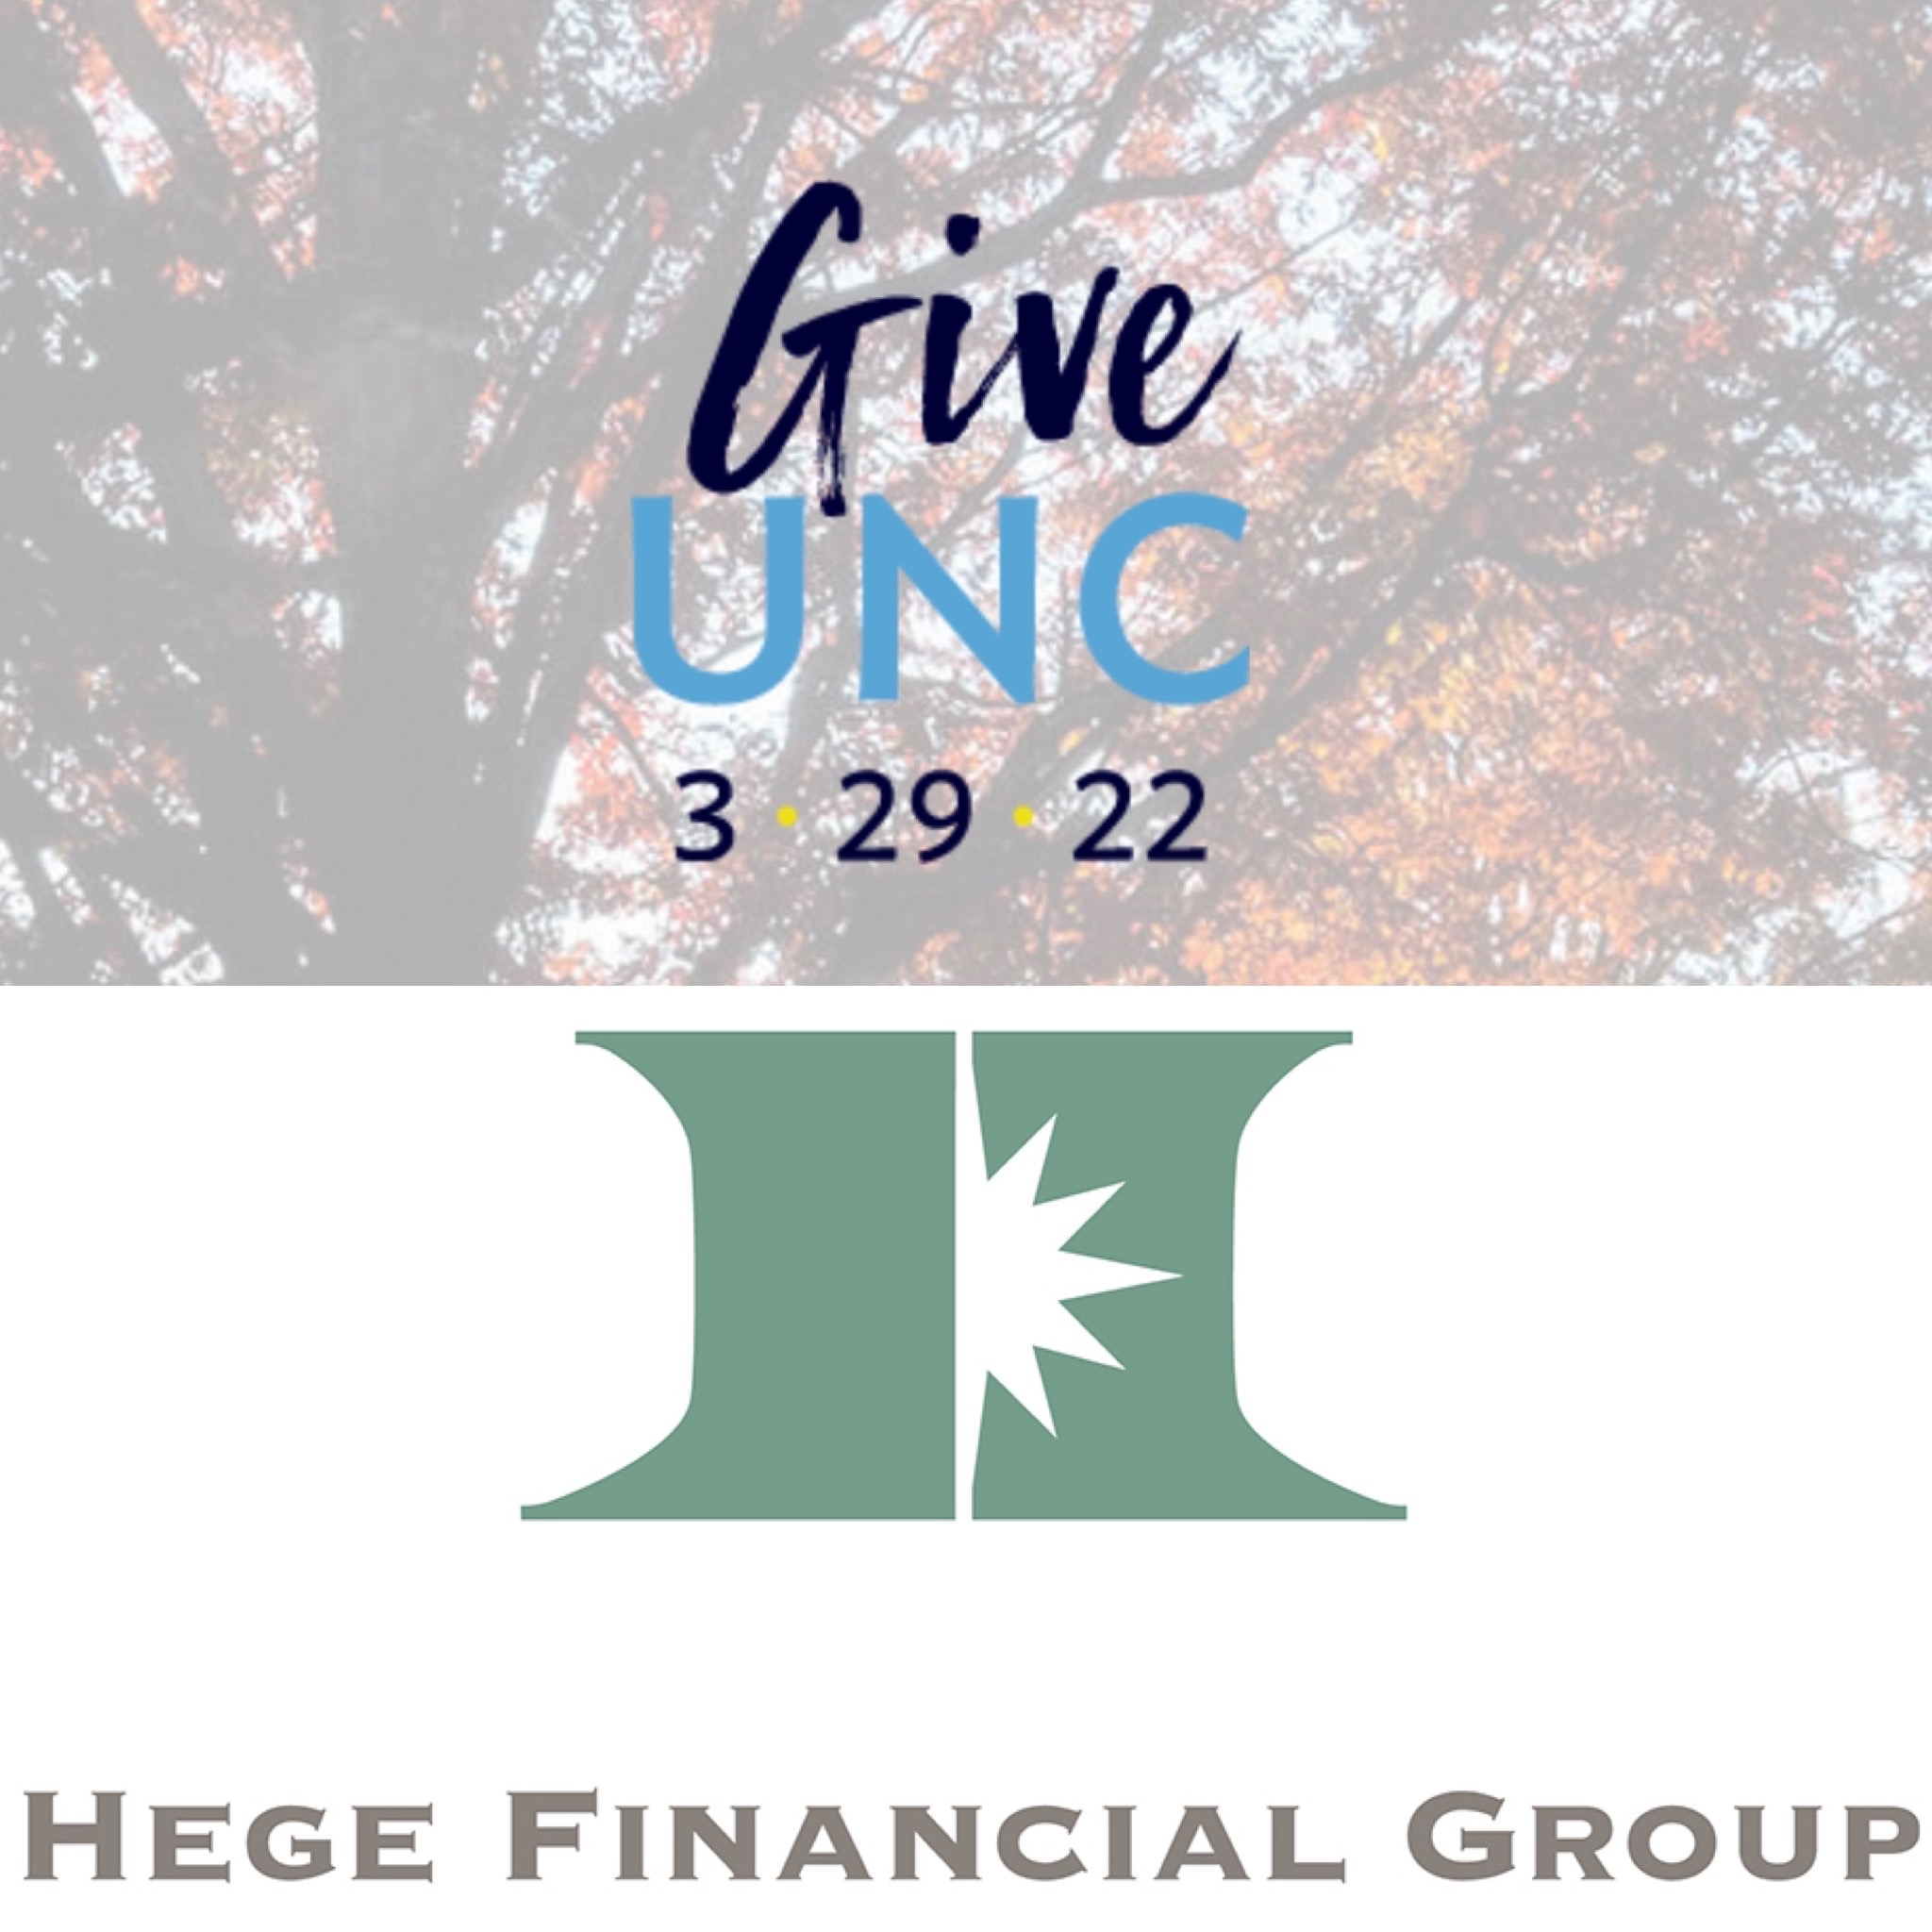 3/29/22 GiveUNC Hege Financial Group Challenge Match